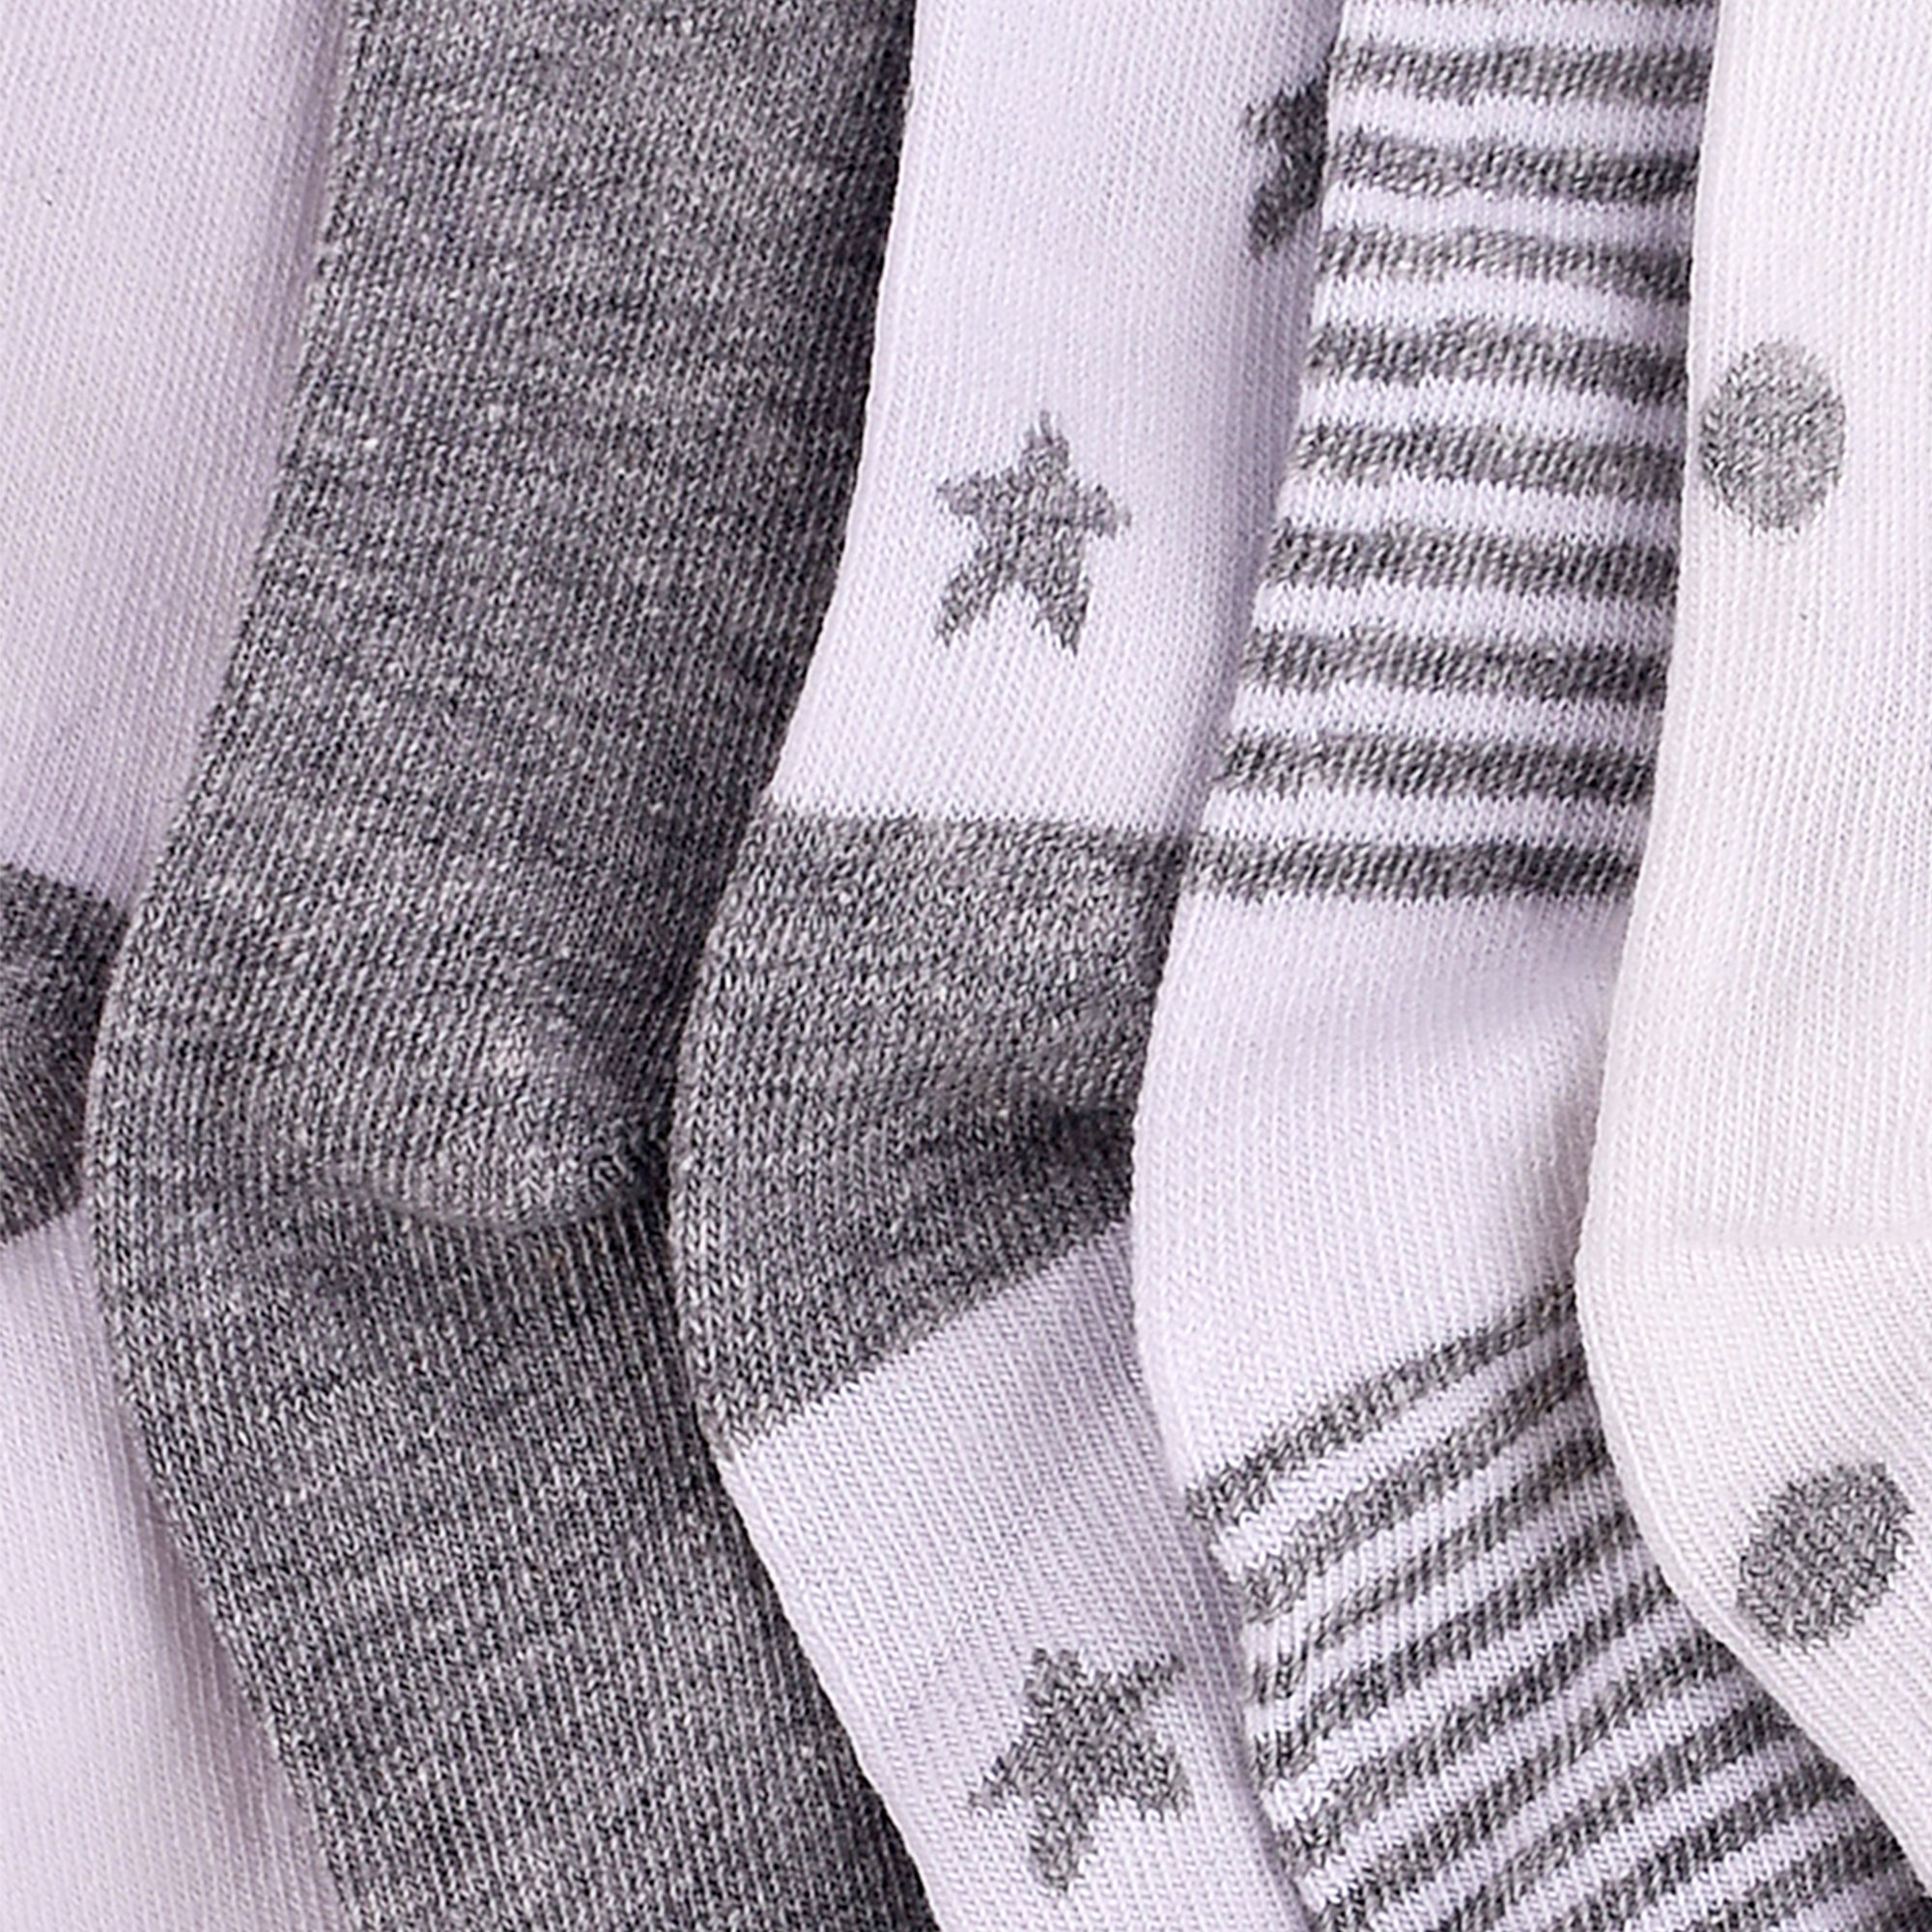 Baby Winter Terry Socks- 12-24 Months - Pack of 5 Pairs Grey